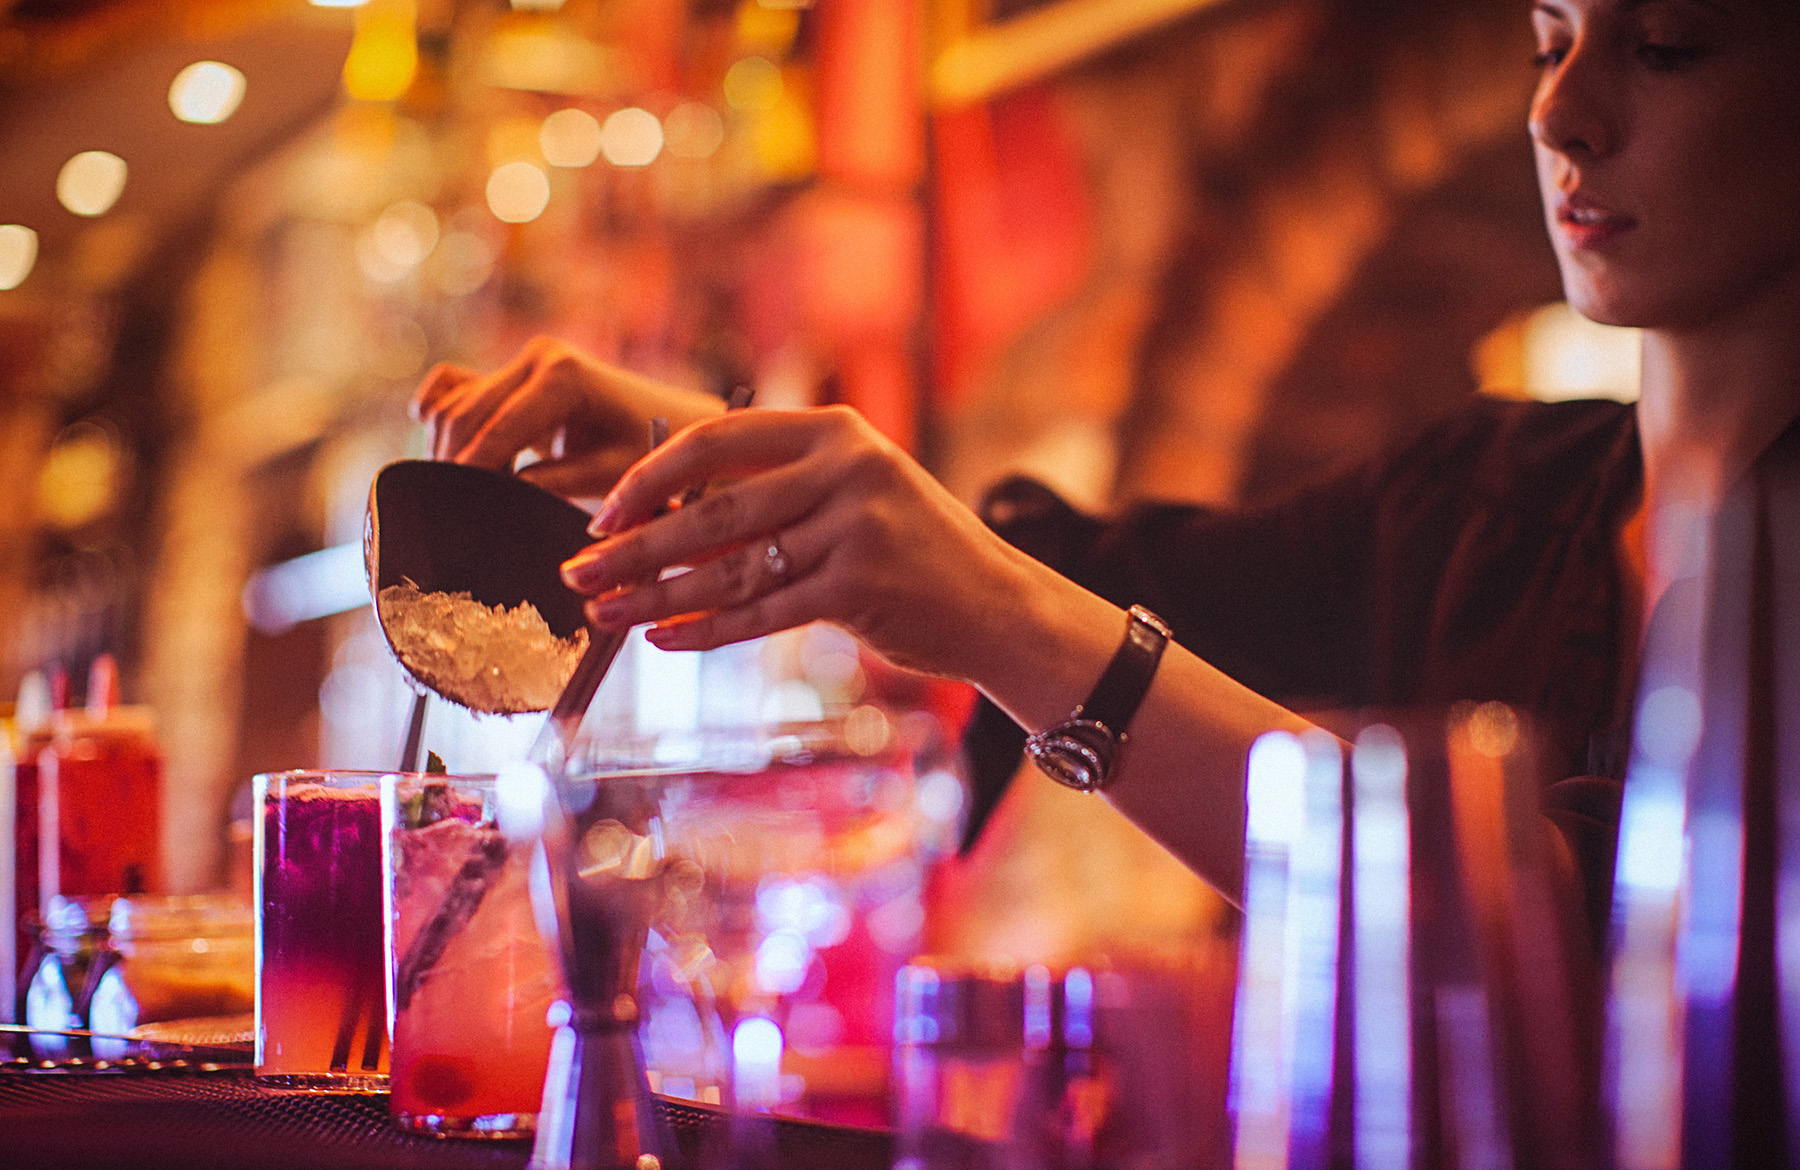 For Beverage Brands, There's Big Opportunity in the Hotel Bar